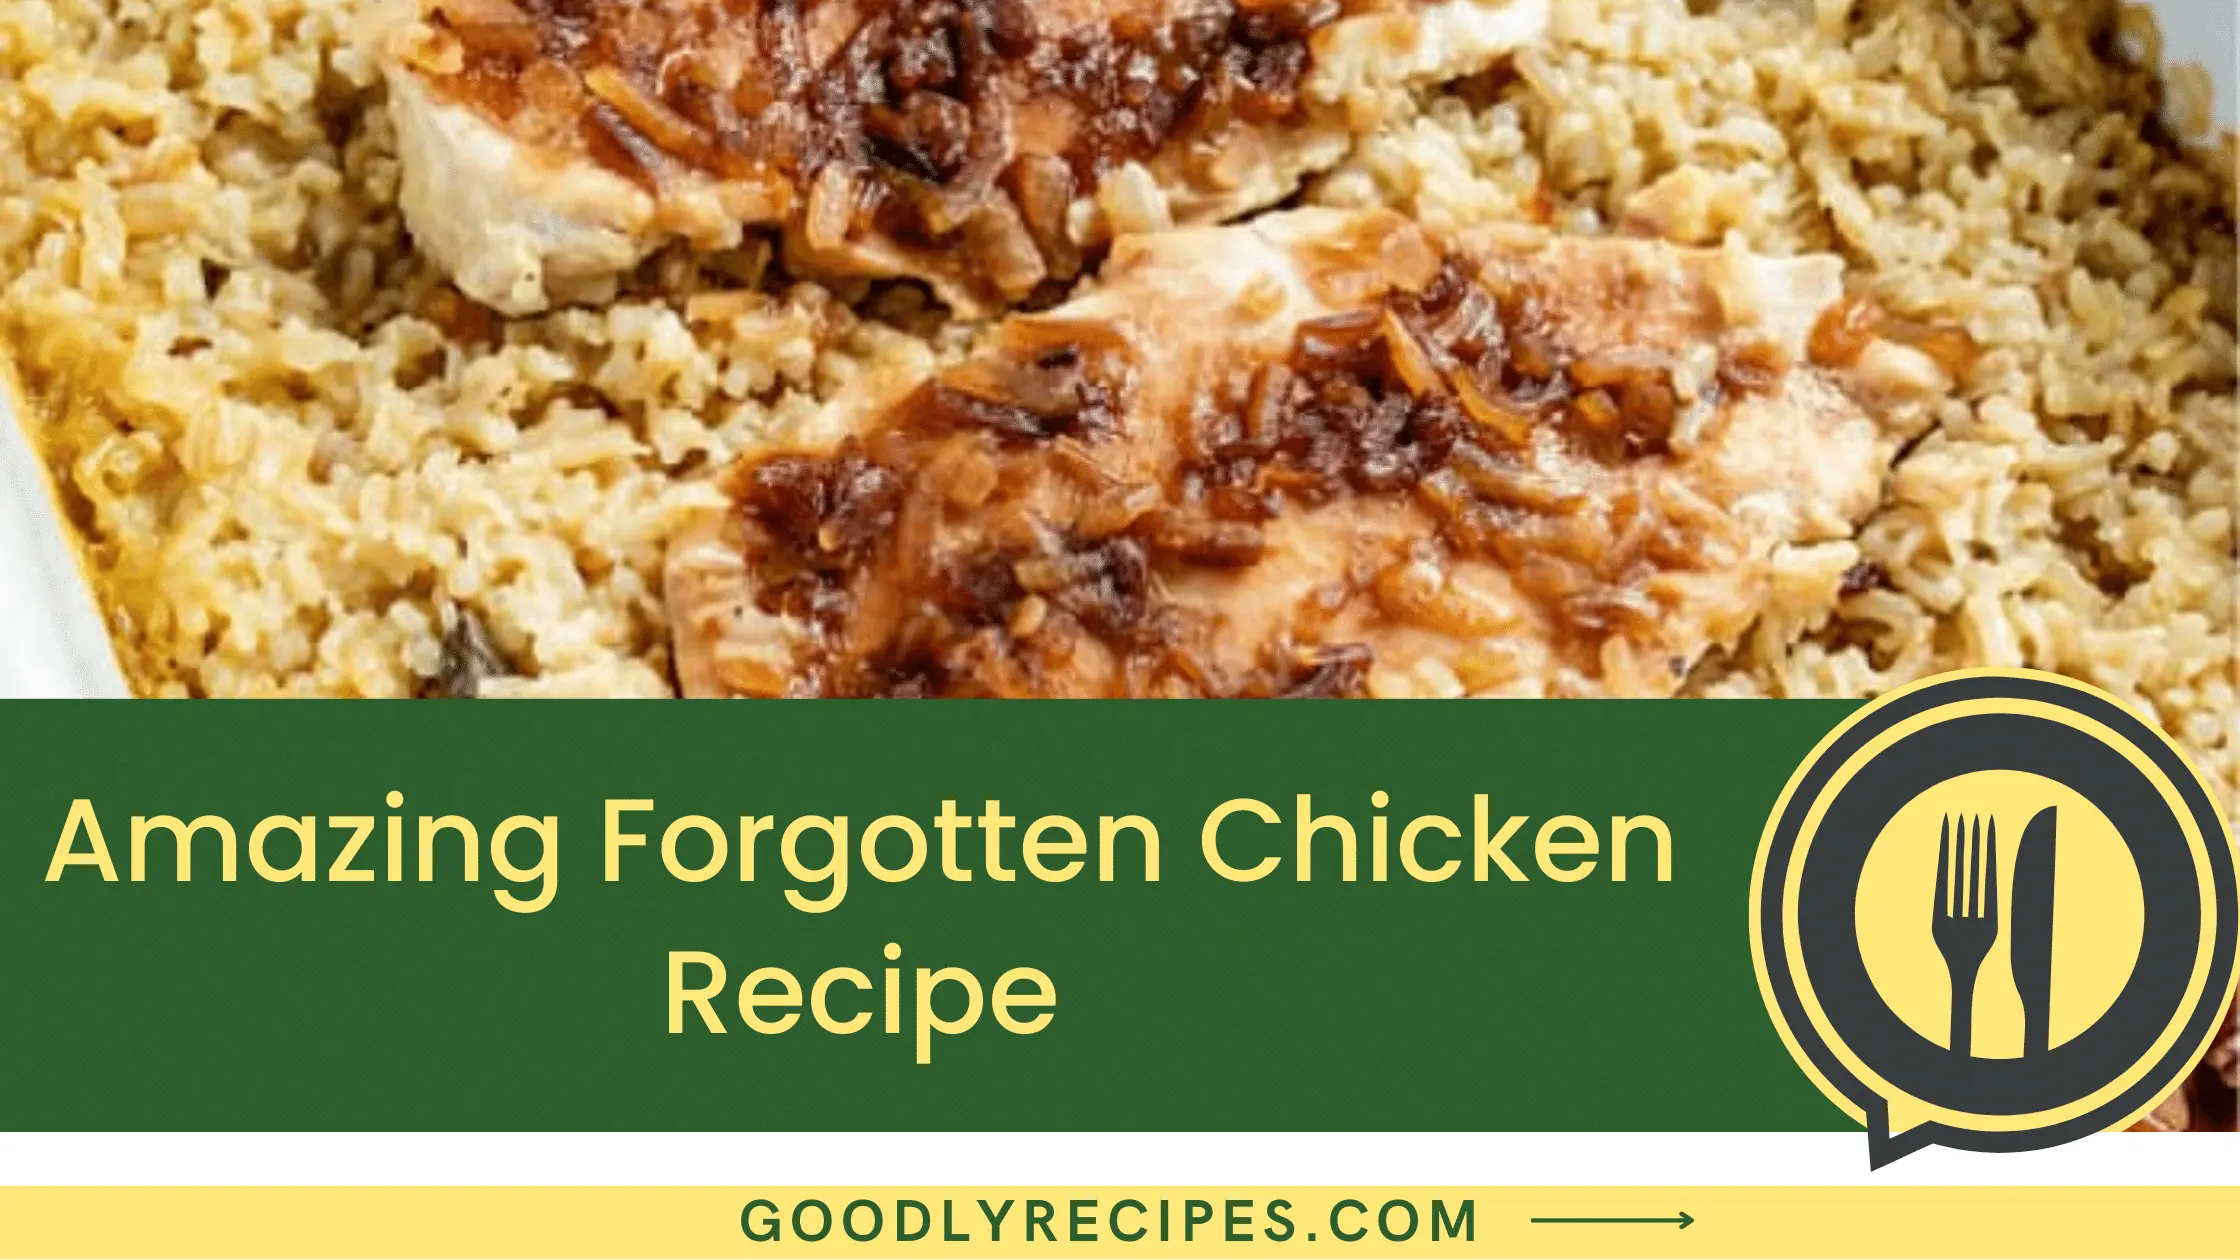 Amazing Forgotten Chicken Recipe - For Food Lovers